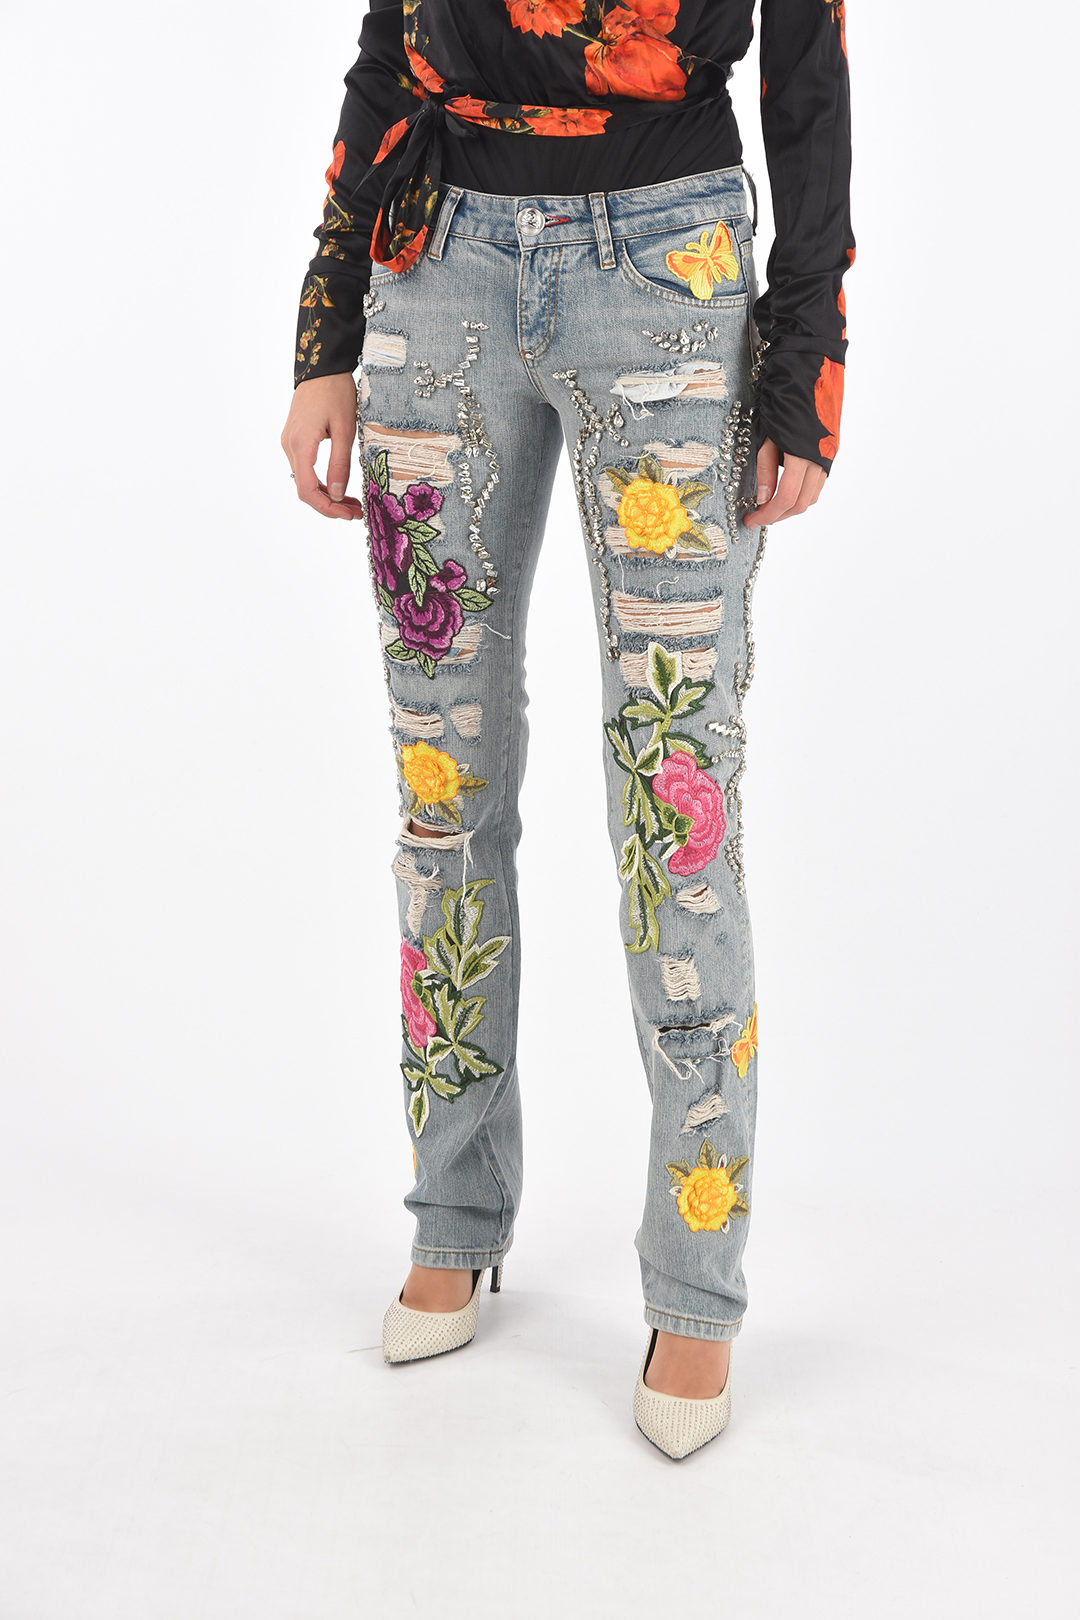 JEP breedtegraad Bestaan Philipp Plein crystal all over distressed FABULOUS straight cut jeans women  - Glamood Outlet